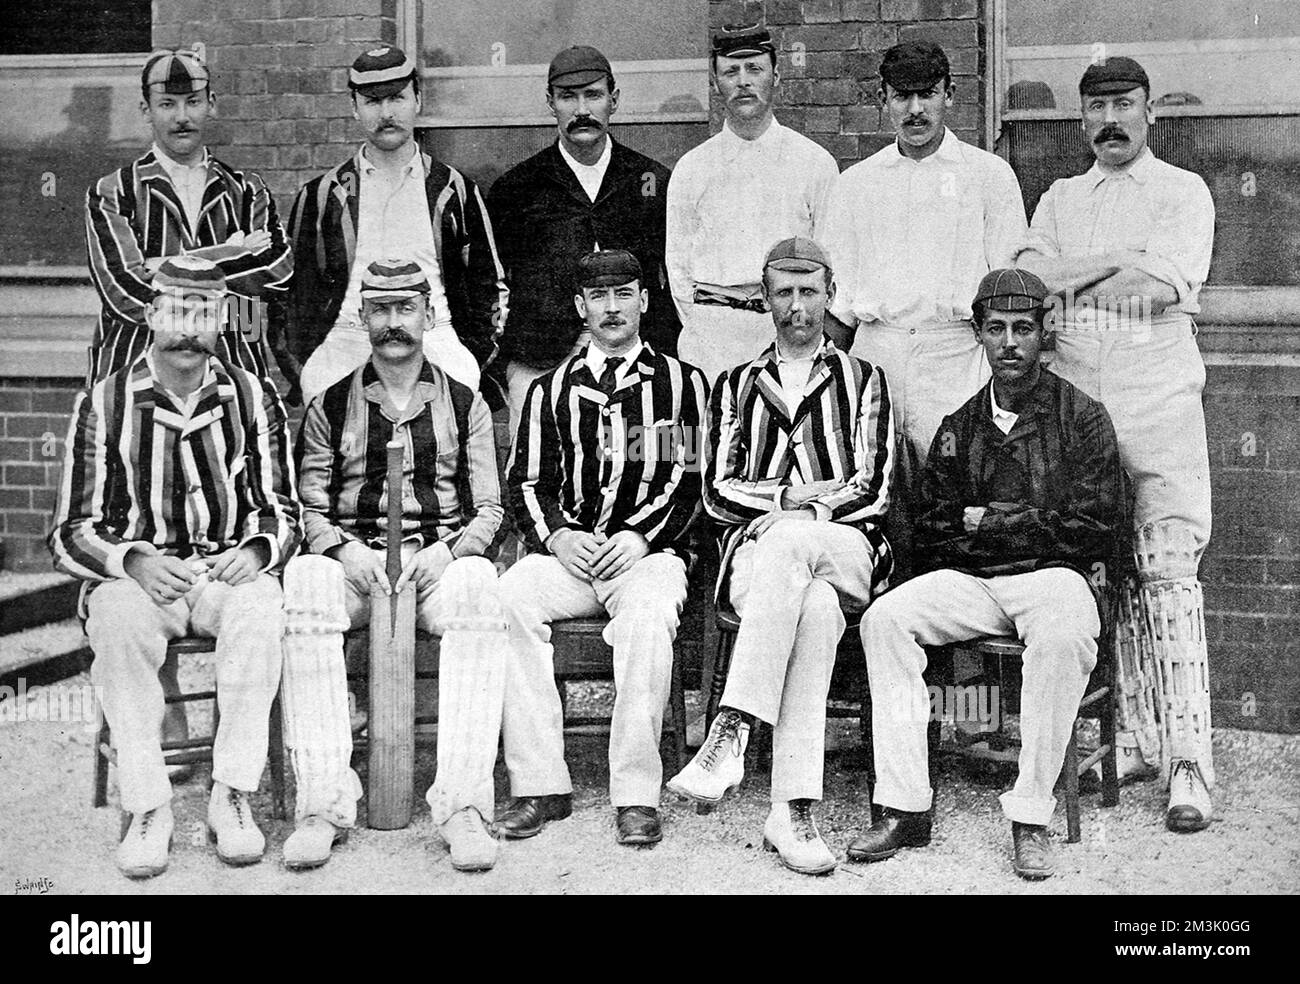 Photograph of the Middlesex County Cricket team for the 1892 season. Back row, left to right: R.S. Lucas, T.C. O'Brien, Phillips, West, Hearne, Rawlin. Front row, left to right: A.E. Stoddart, S.W. Scott, A.J. Webbe (captain), E.A. Nepean, P.J.T. Henery. Stock Photo